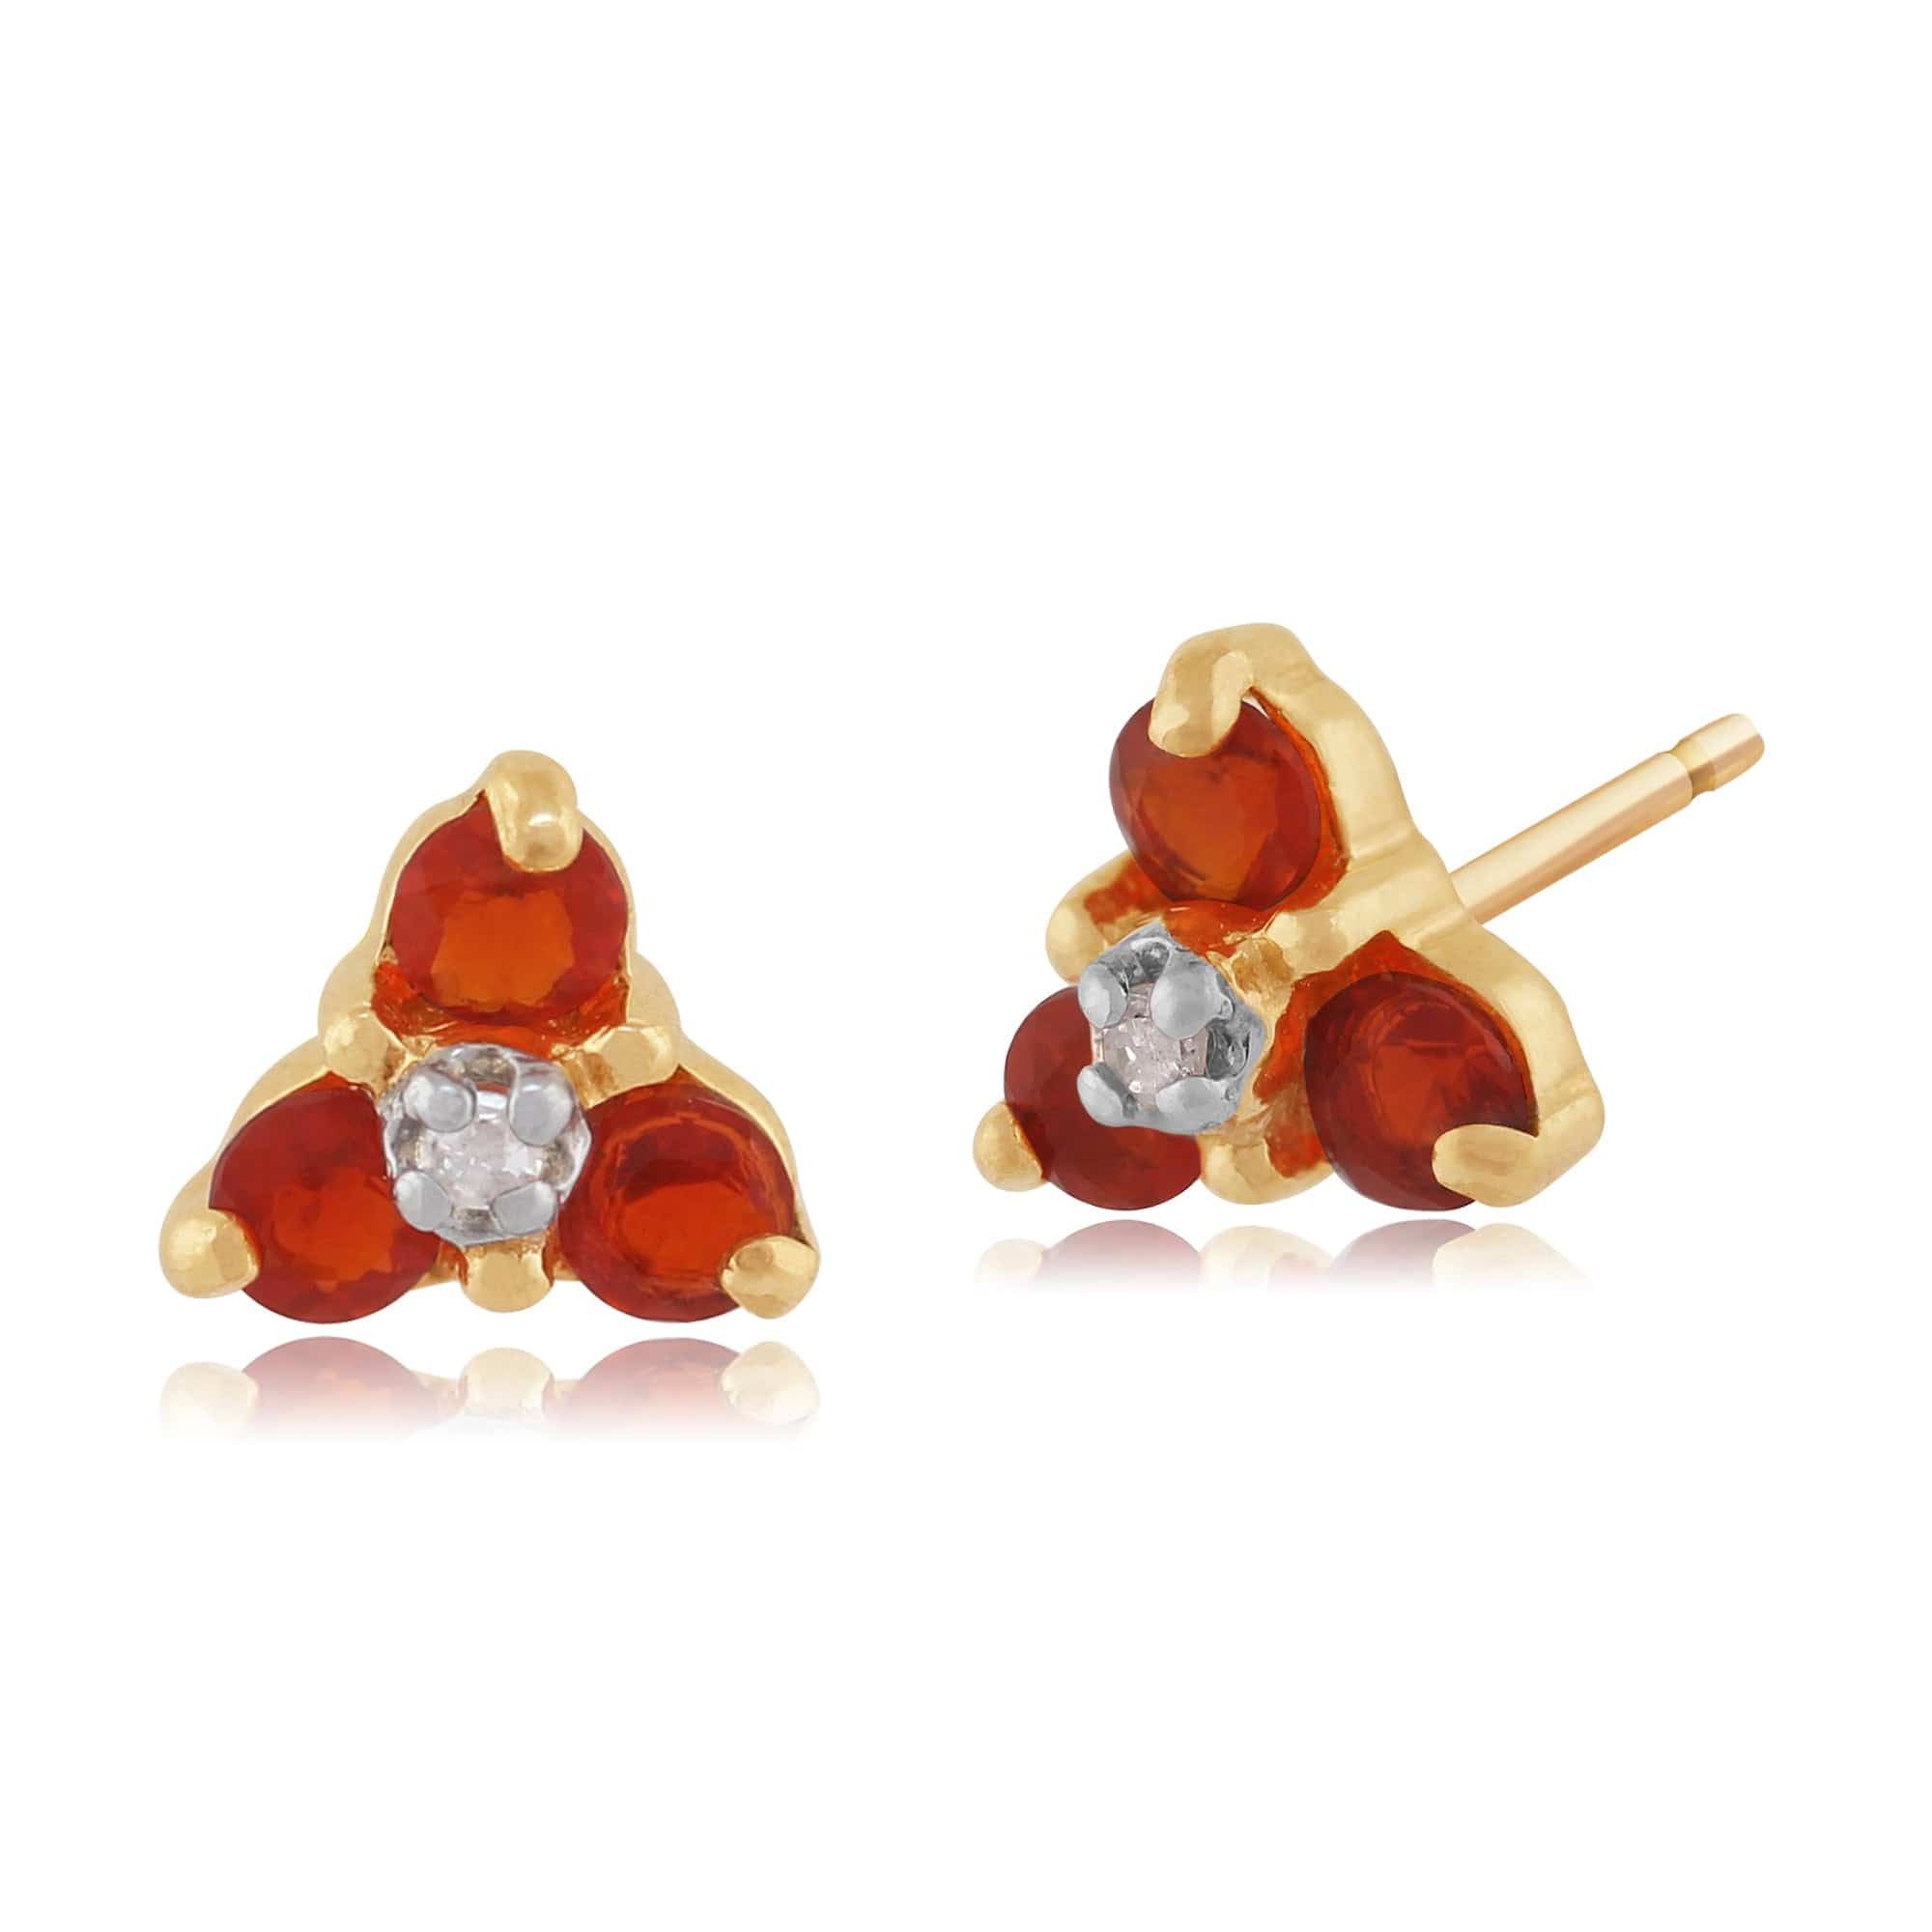 Classic Round Fire Opal & Diamond Cluster Stud Earrings in 9ct Yellow Gold - Gemondo